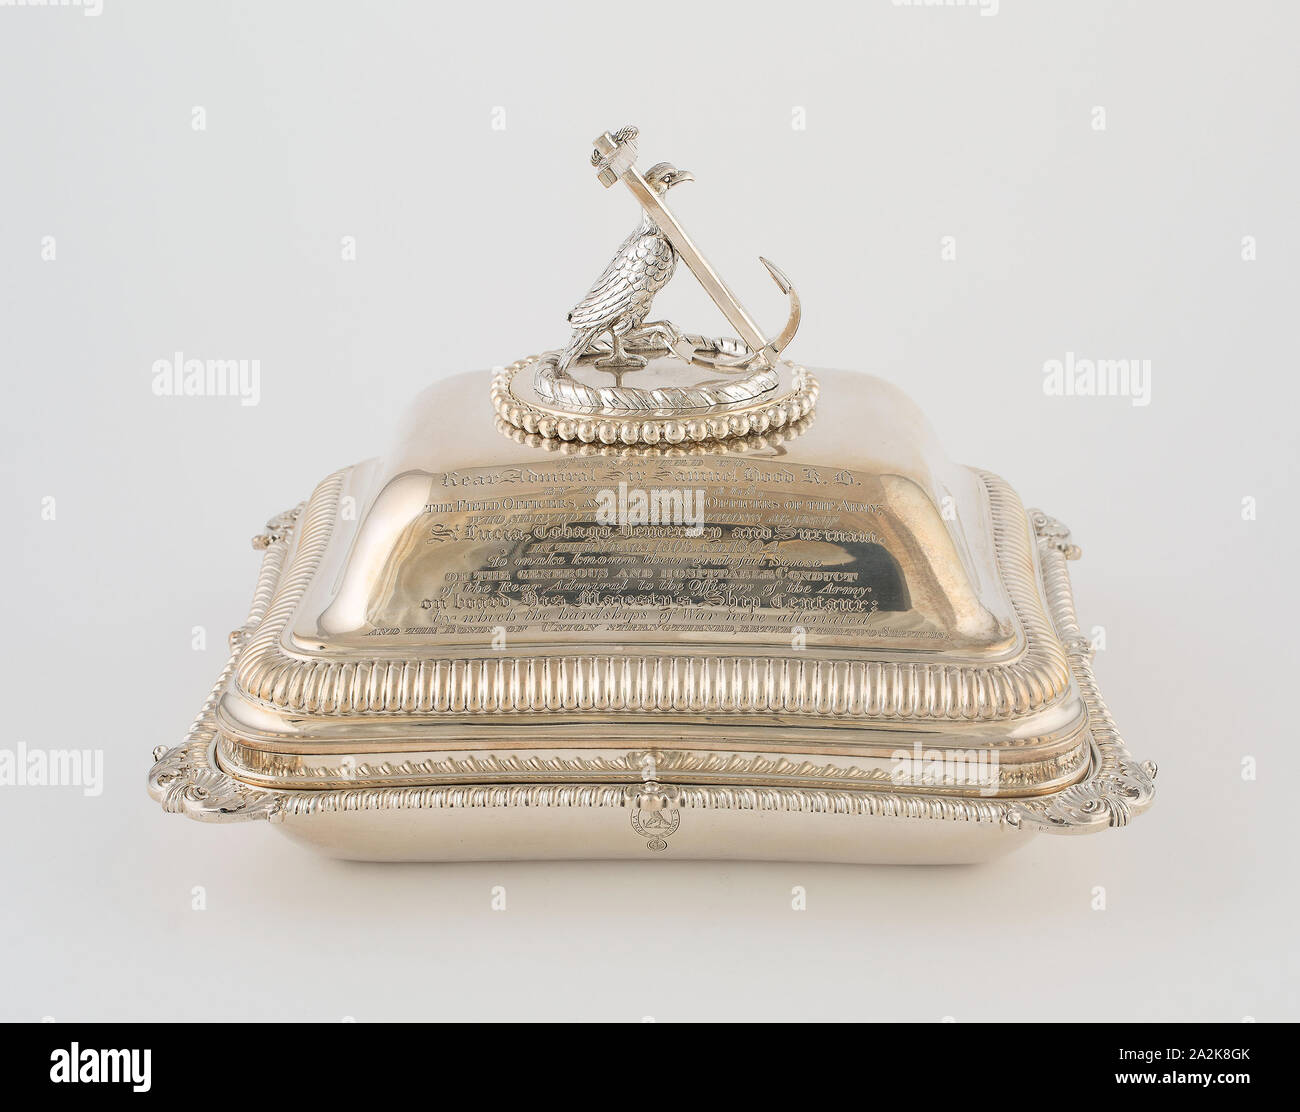 Entree Dish with Cover from the Hood Service, 1806/07, Paul Storr, English, 1771-1844, London, England, London, Sterling silver, 22.2 x 28.6 x 24.3 cm (8 3/4 x 11 1/4 x 9 1/2 in Stock Photo